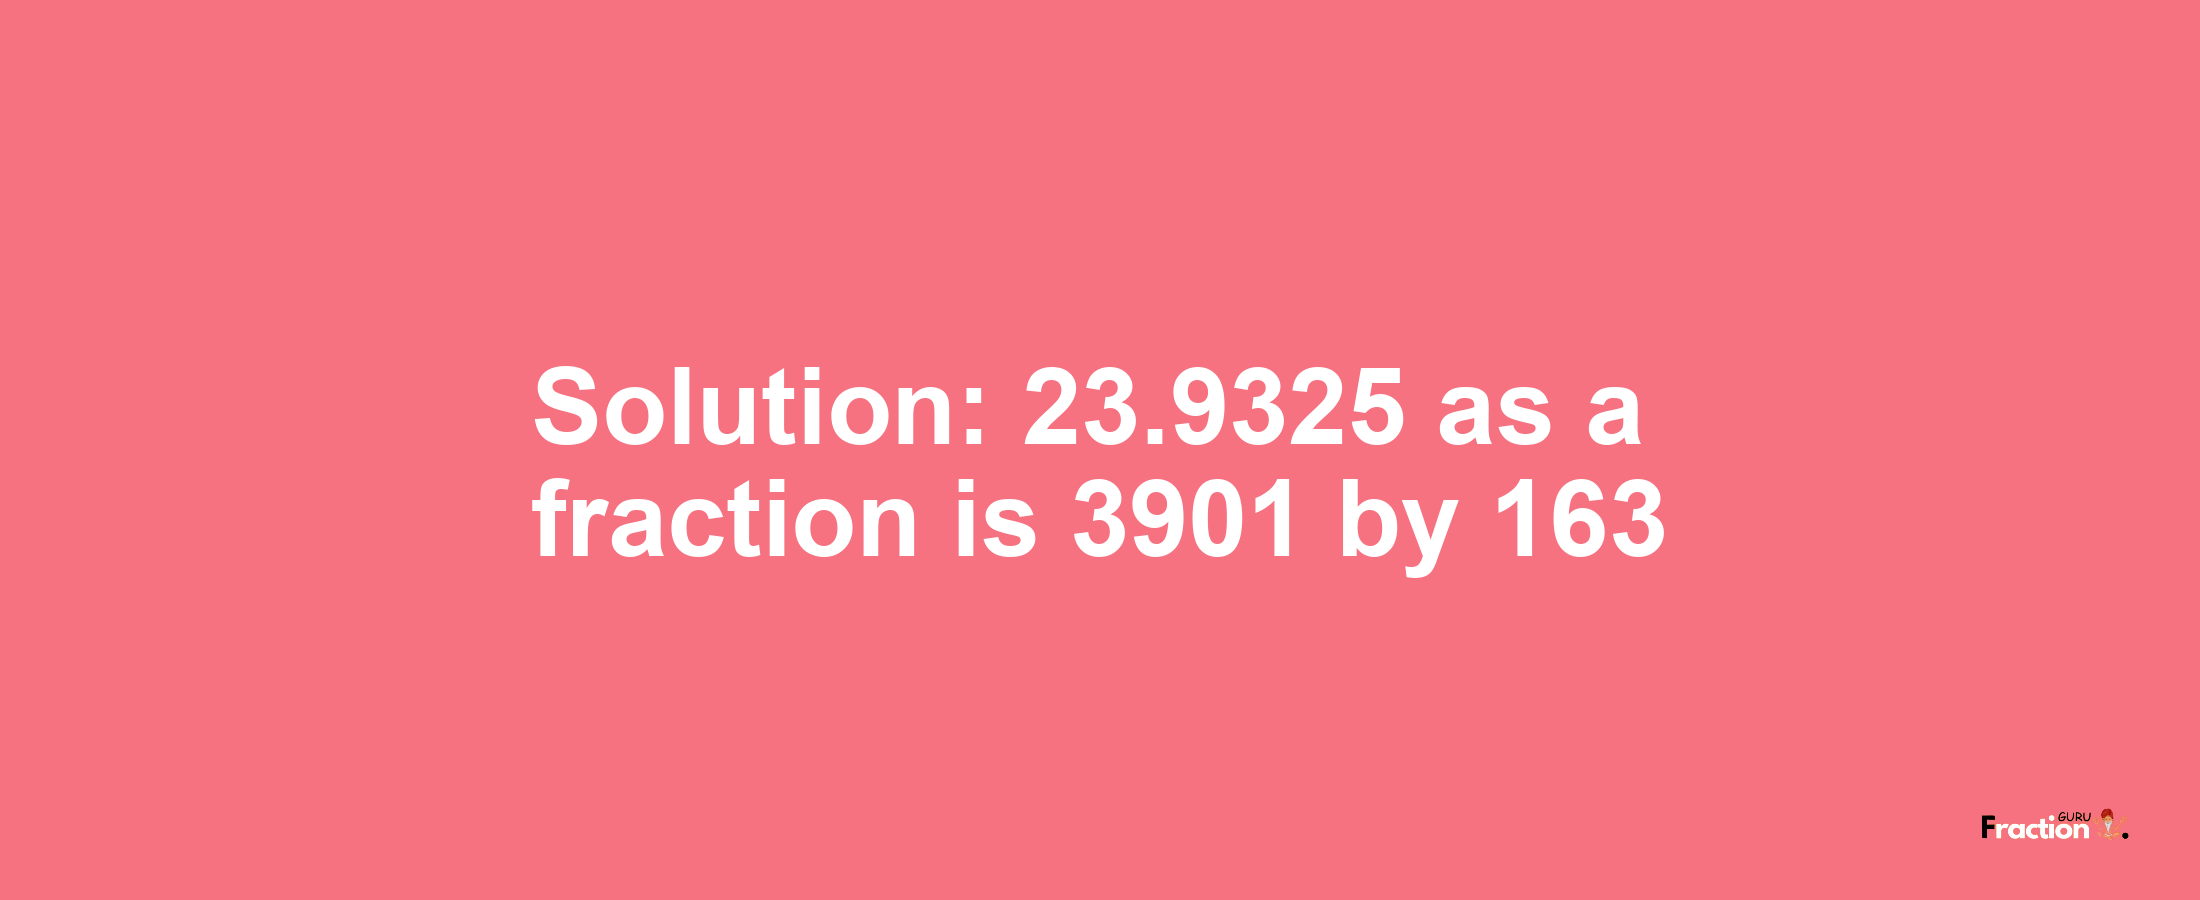 Solution:23.9325 as a fraction is 3901/163